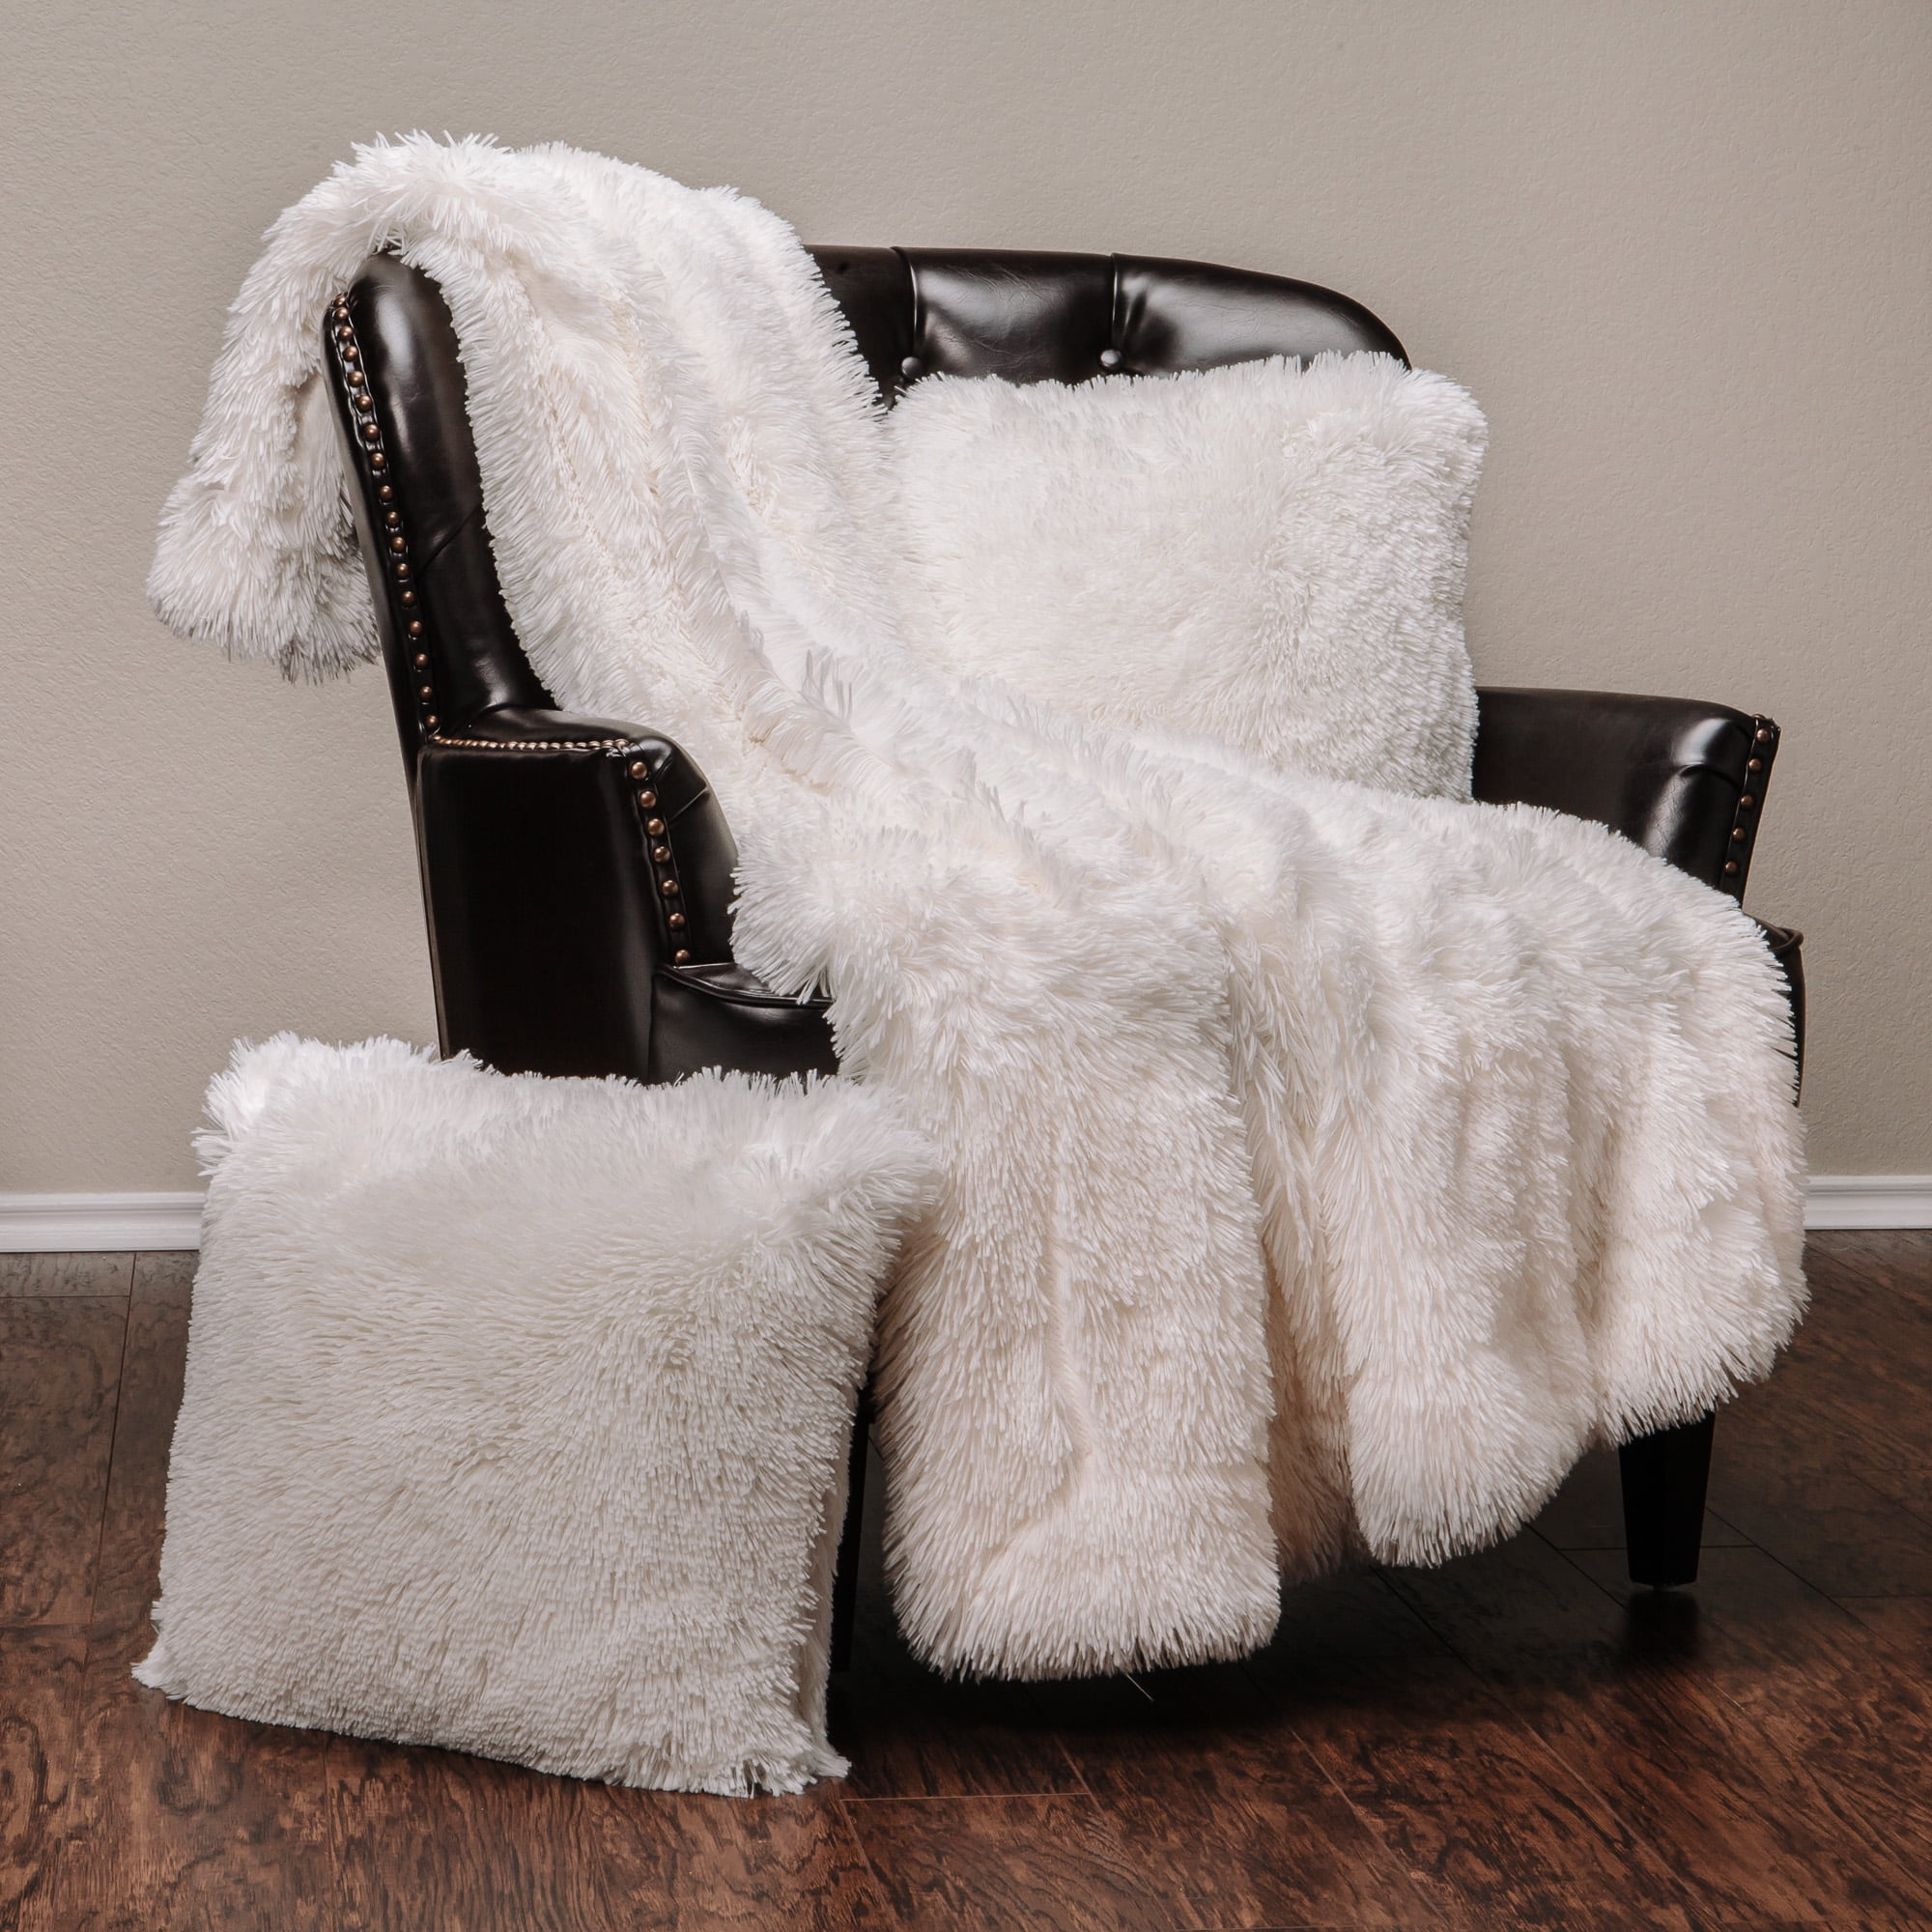 Light Weight Blanket for Bed Couch and L Details about   Chanasya Fuzzy Faux Fur Throw Blanket 